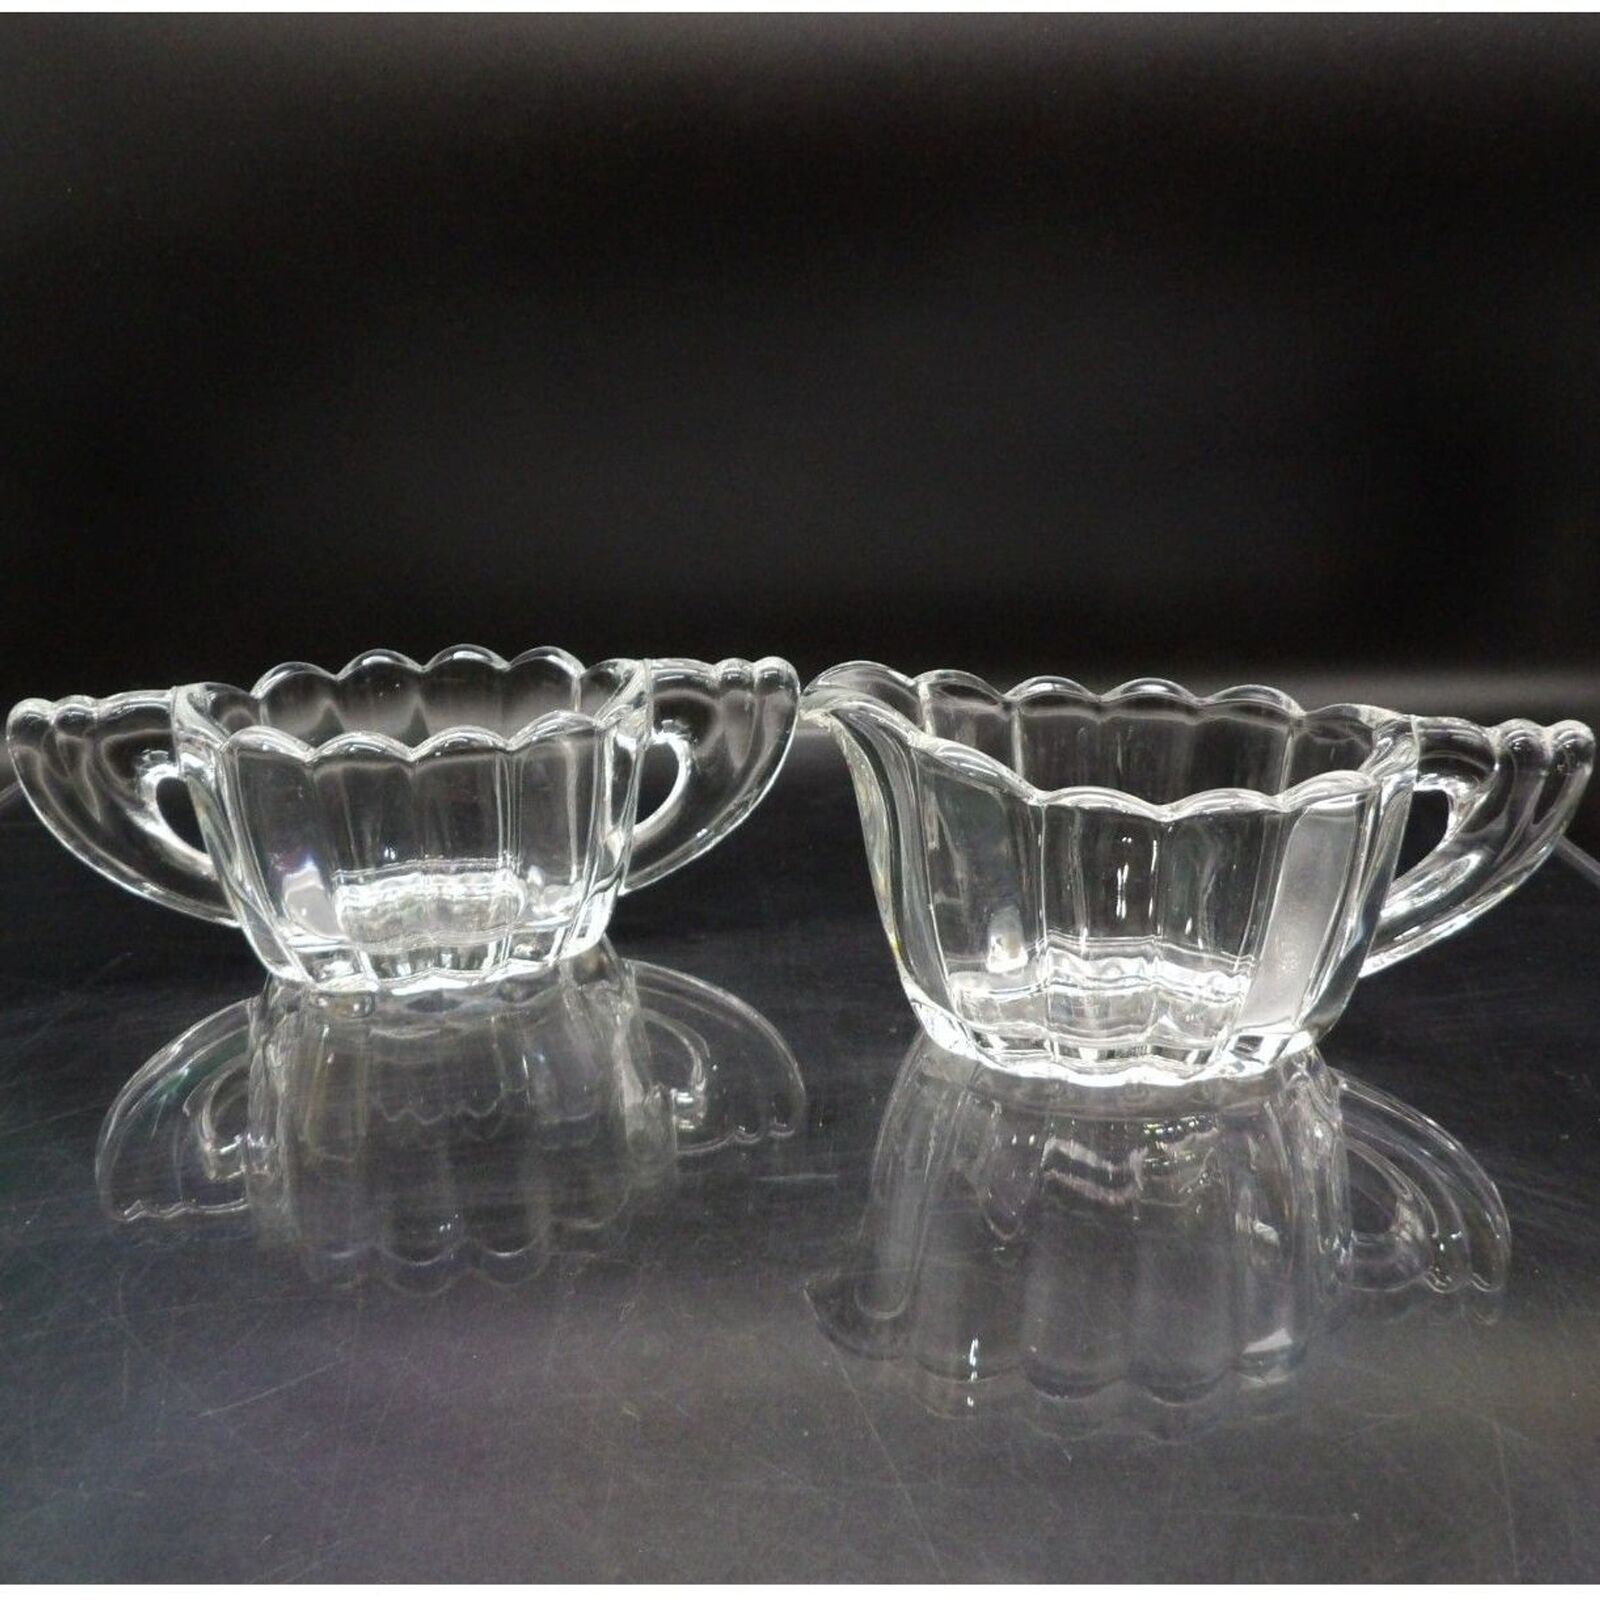 Vintage Crystolite Creamer and Open Sugar Set by Heisey Pressed Clear Glass